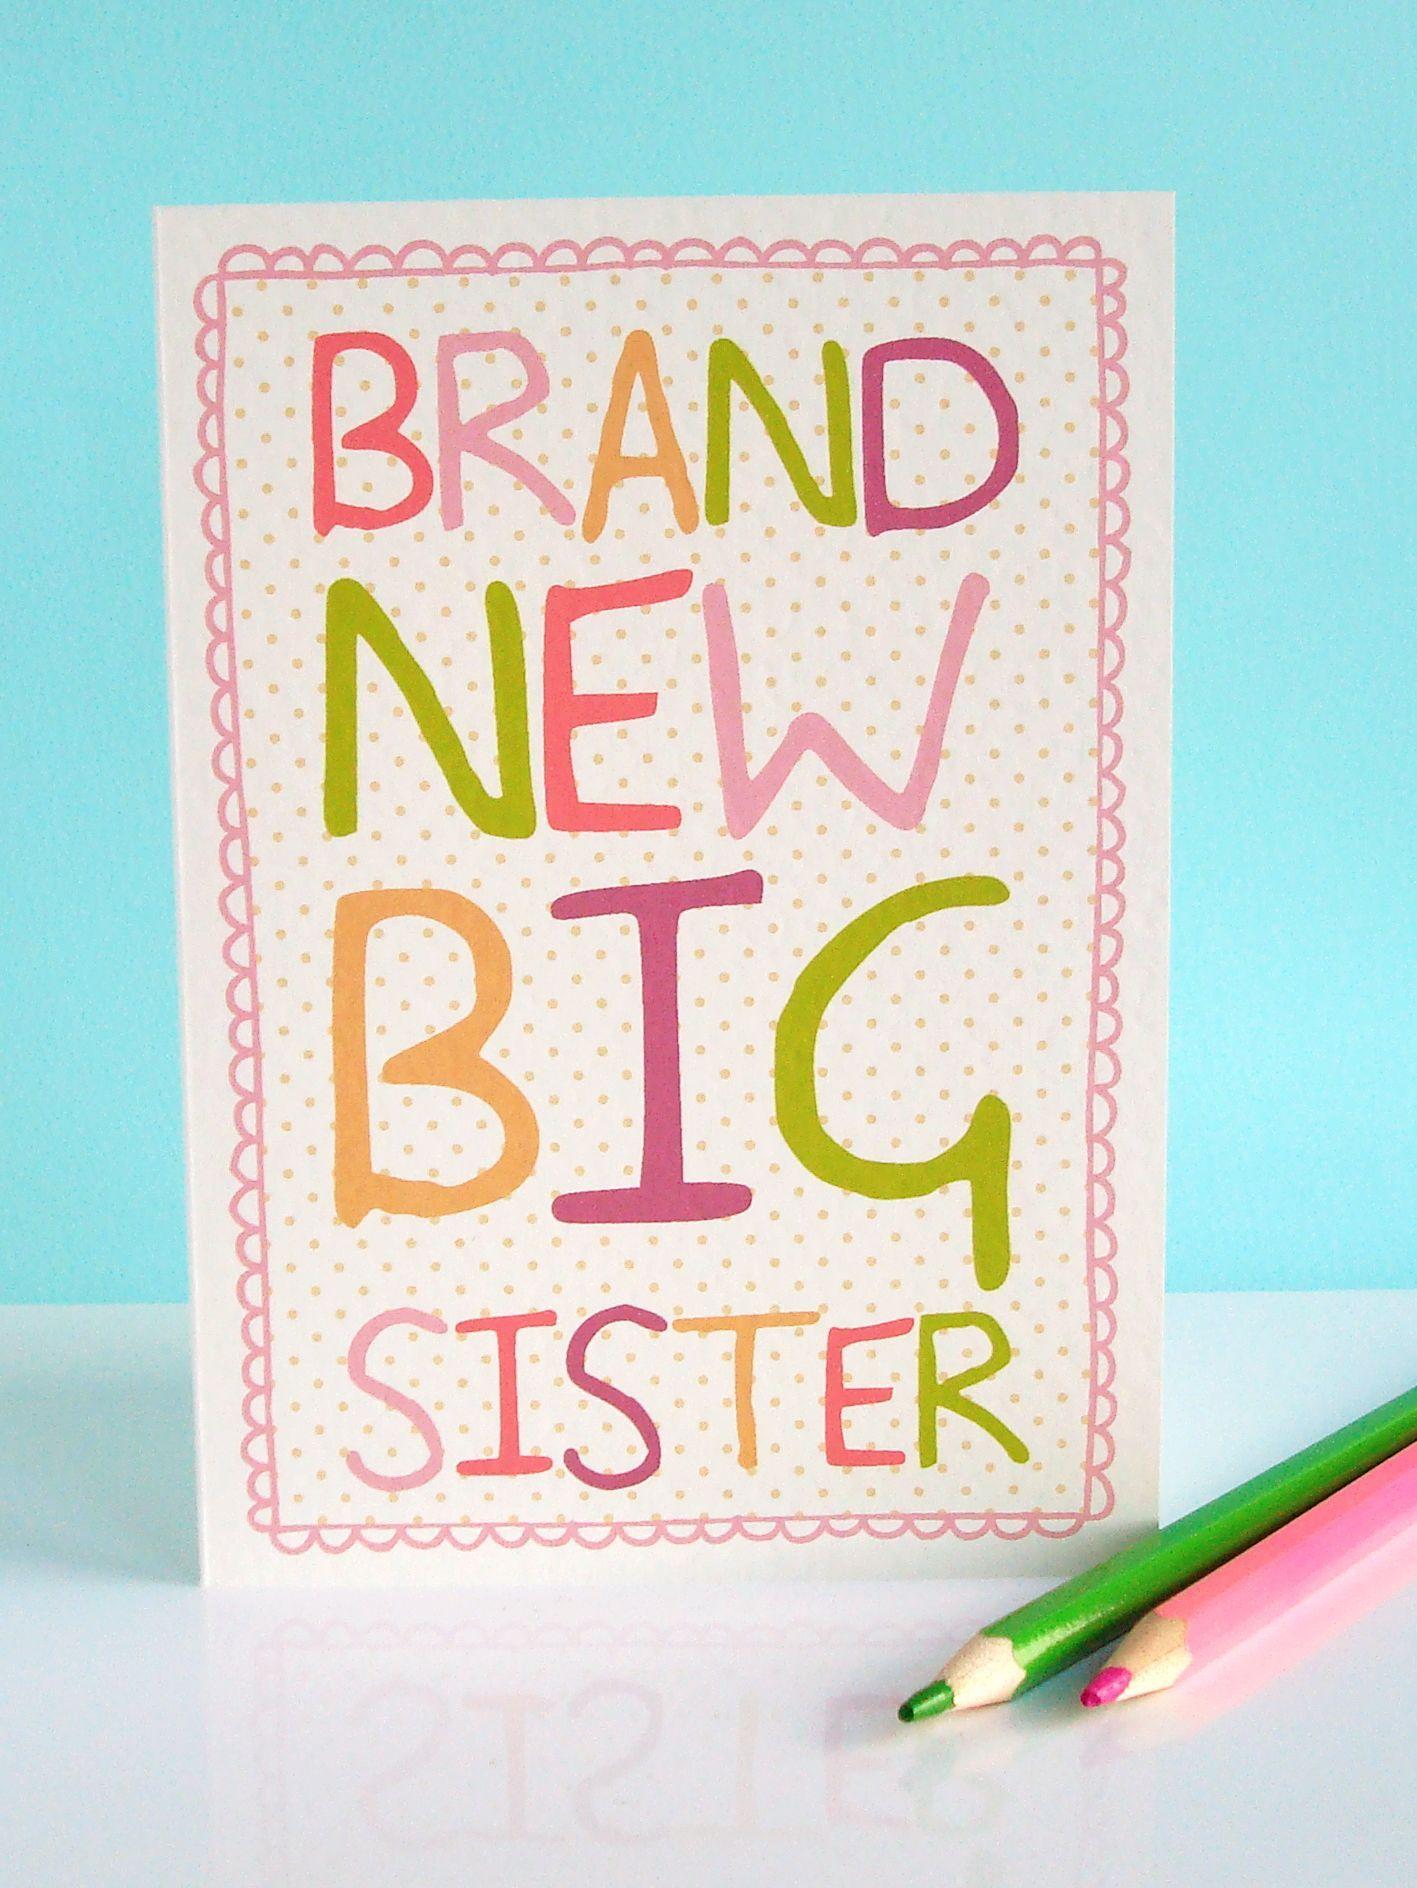 New Baby Card - Brand New Big Sister